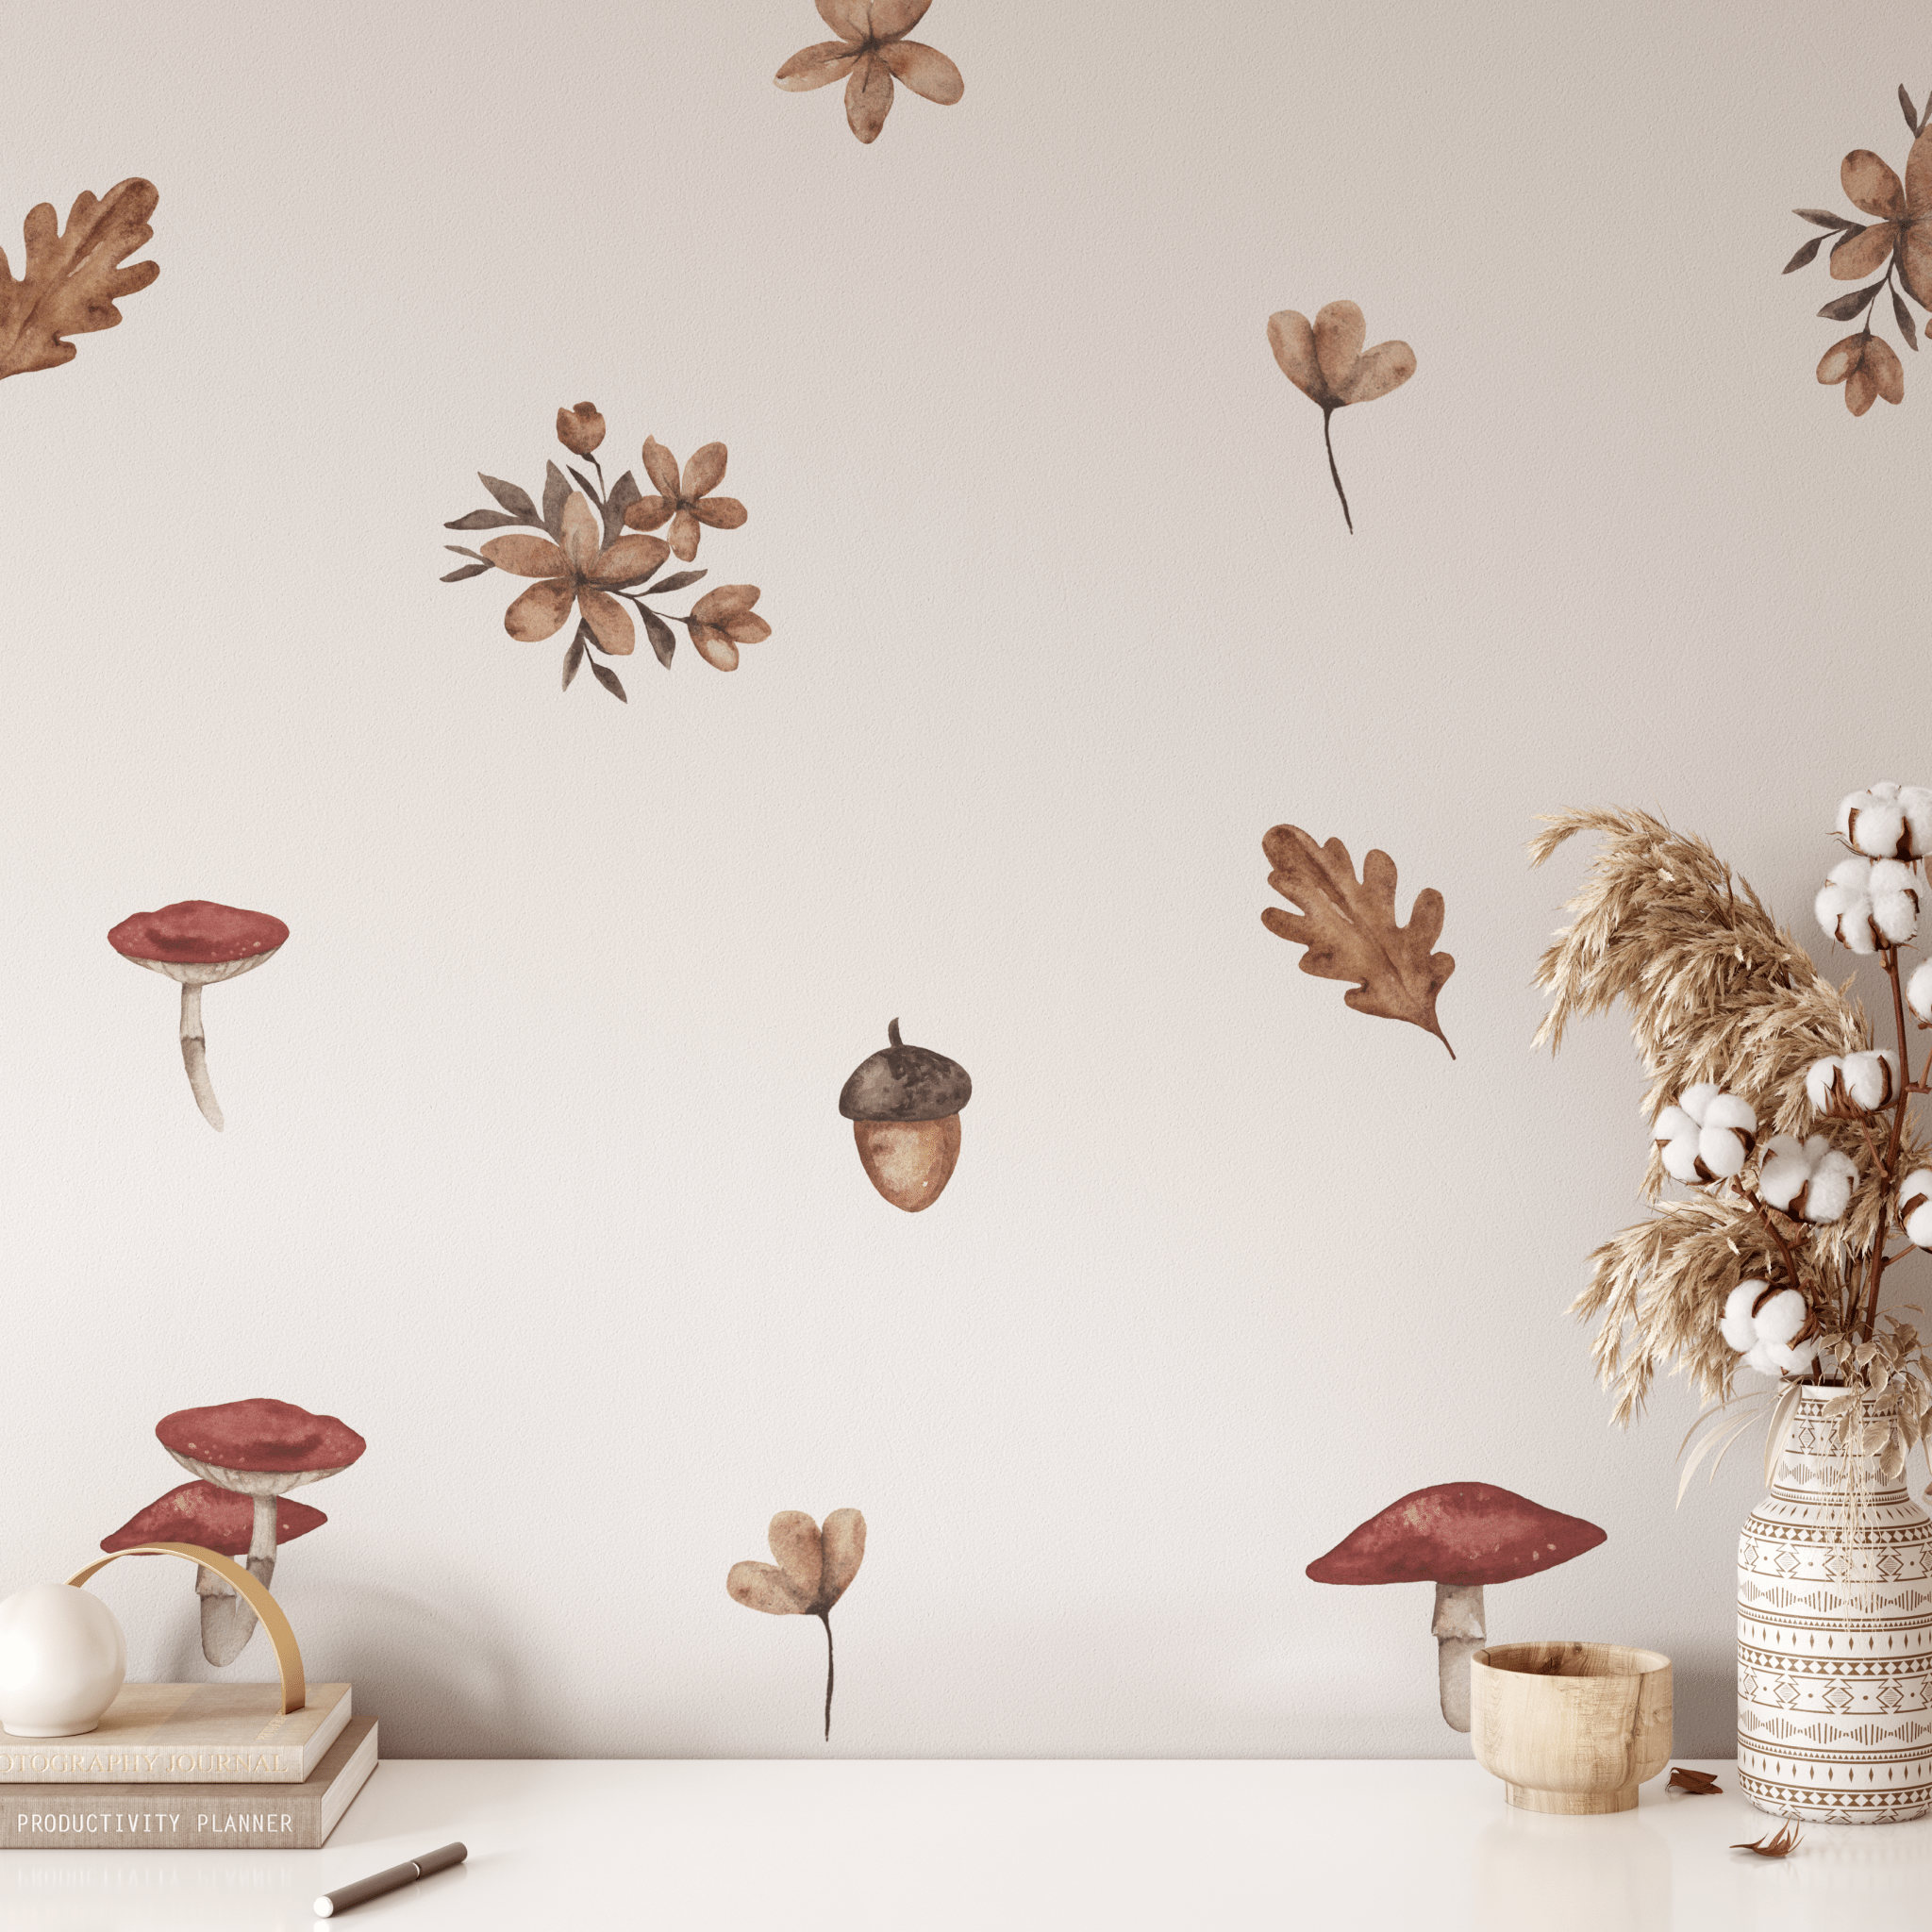 Forest floral wall stickers with natural wood elements like mushrooms, and acorns